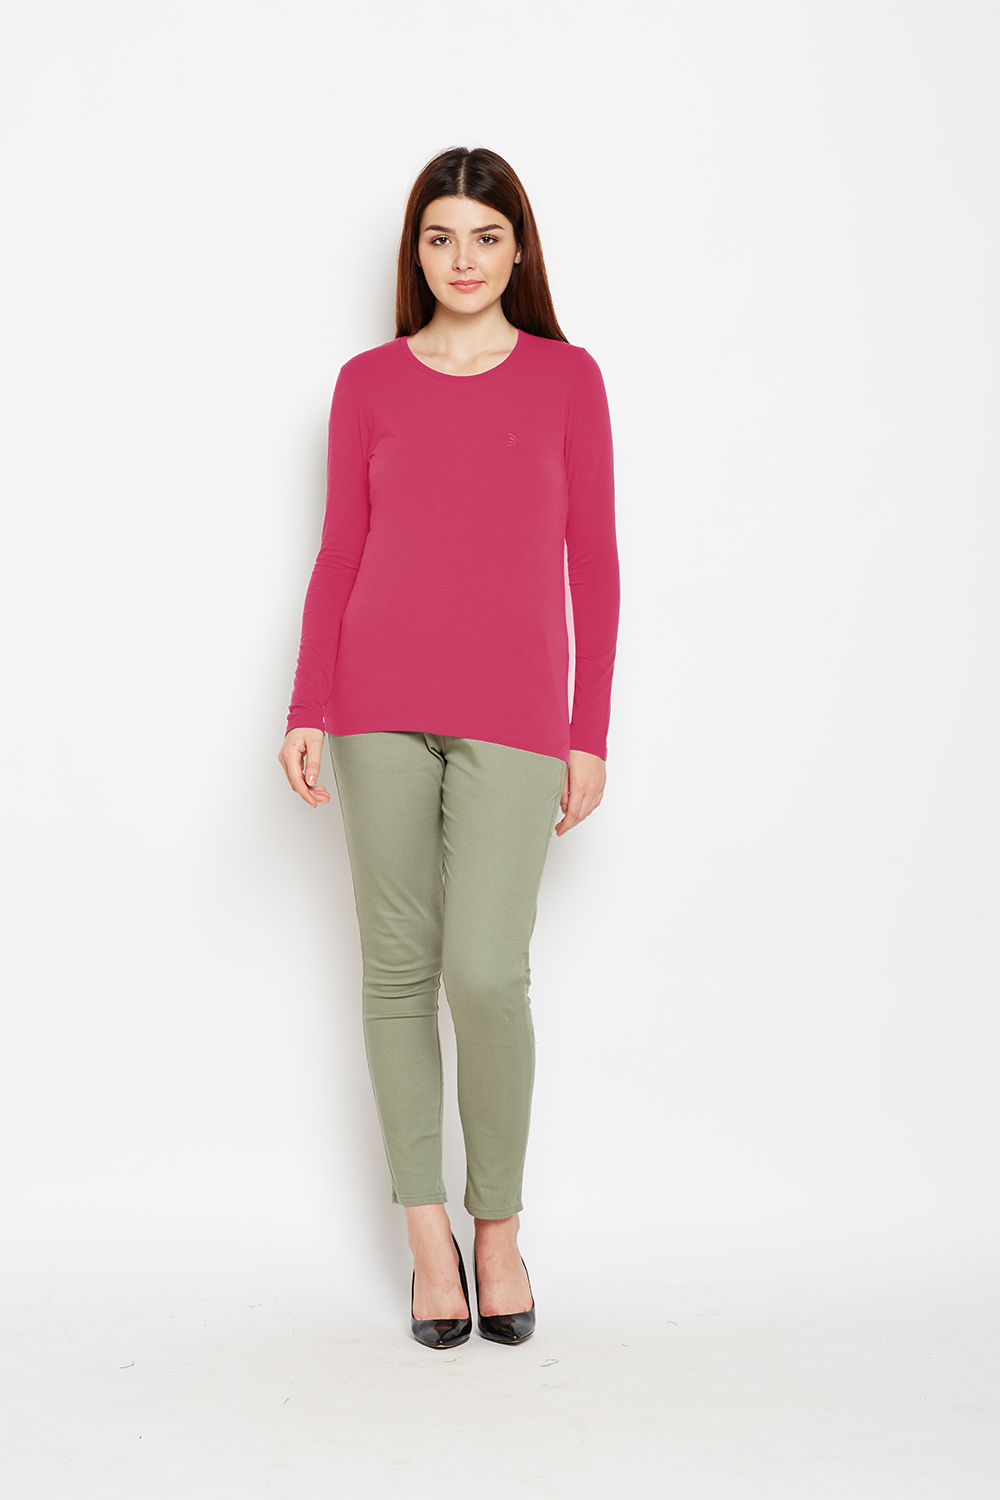 Women's Guide to Matching Straight Pant with full sleeve t shirts